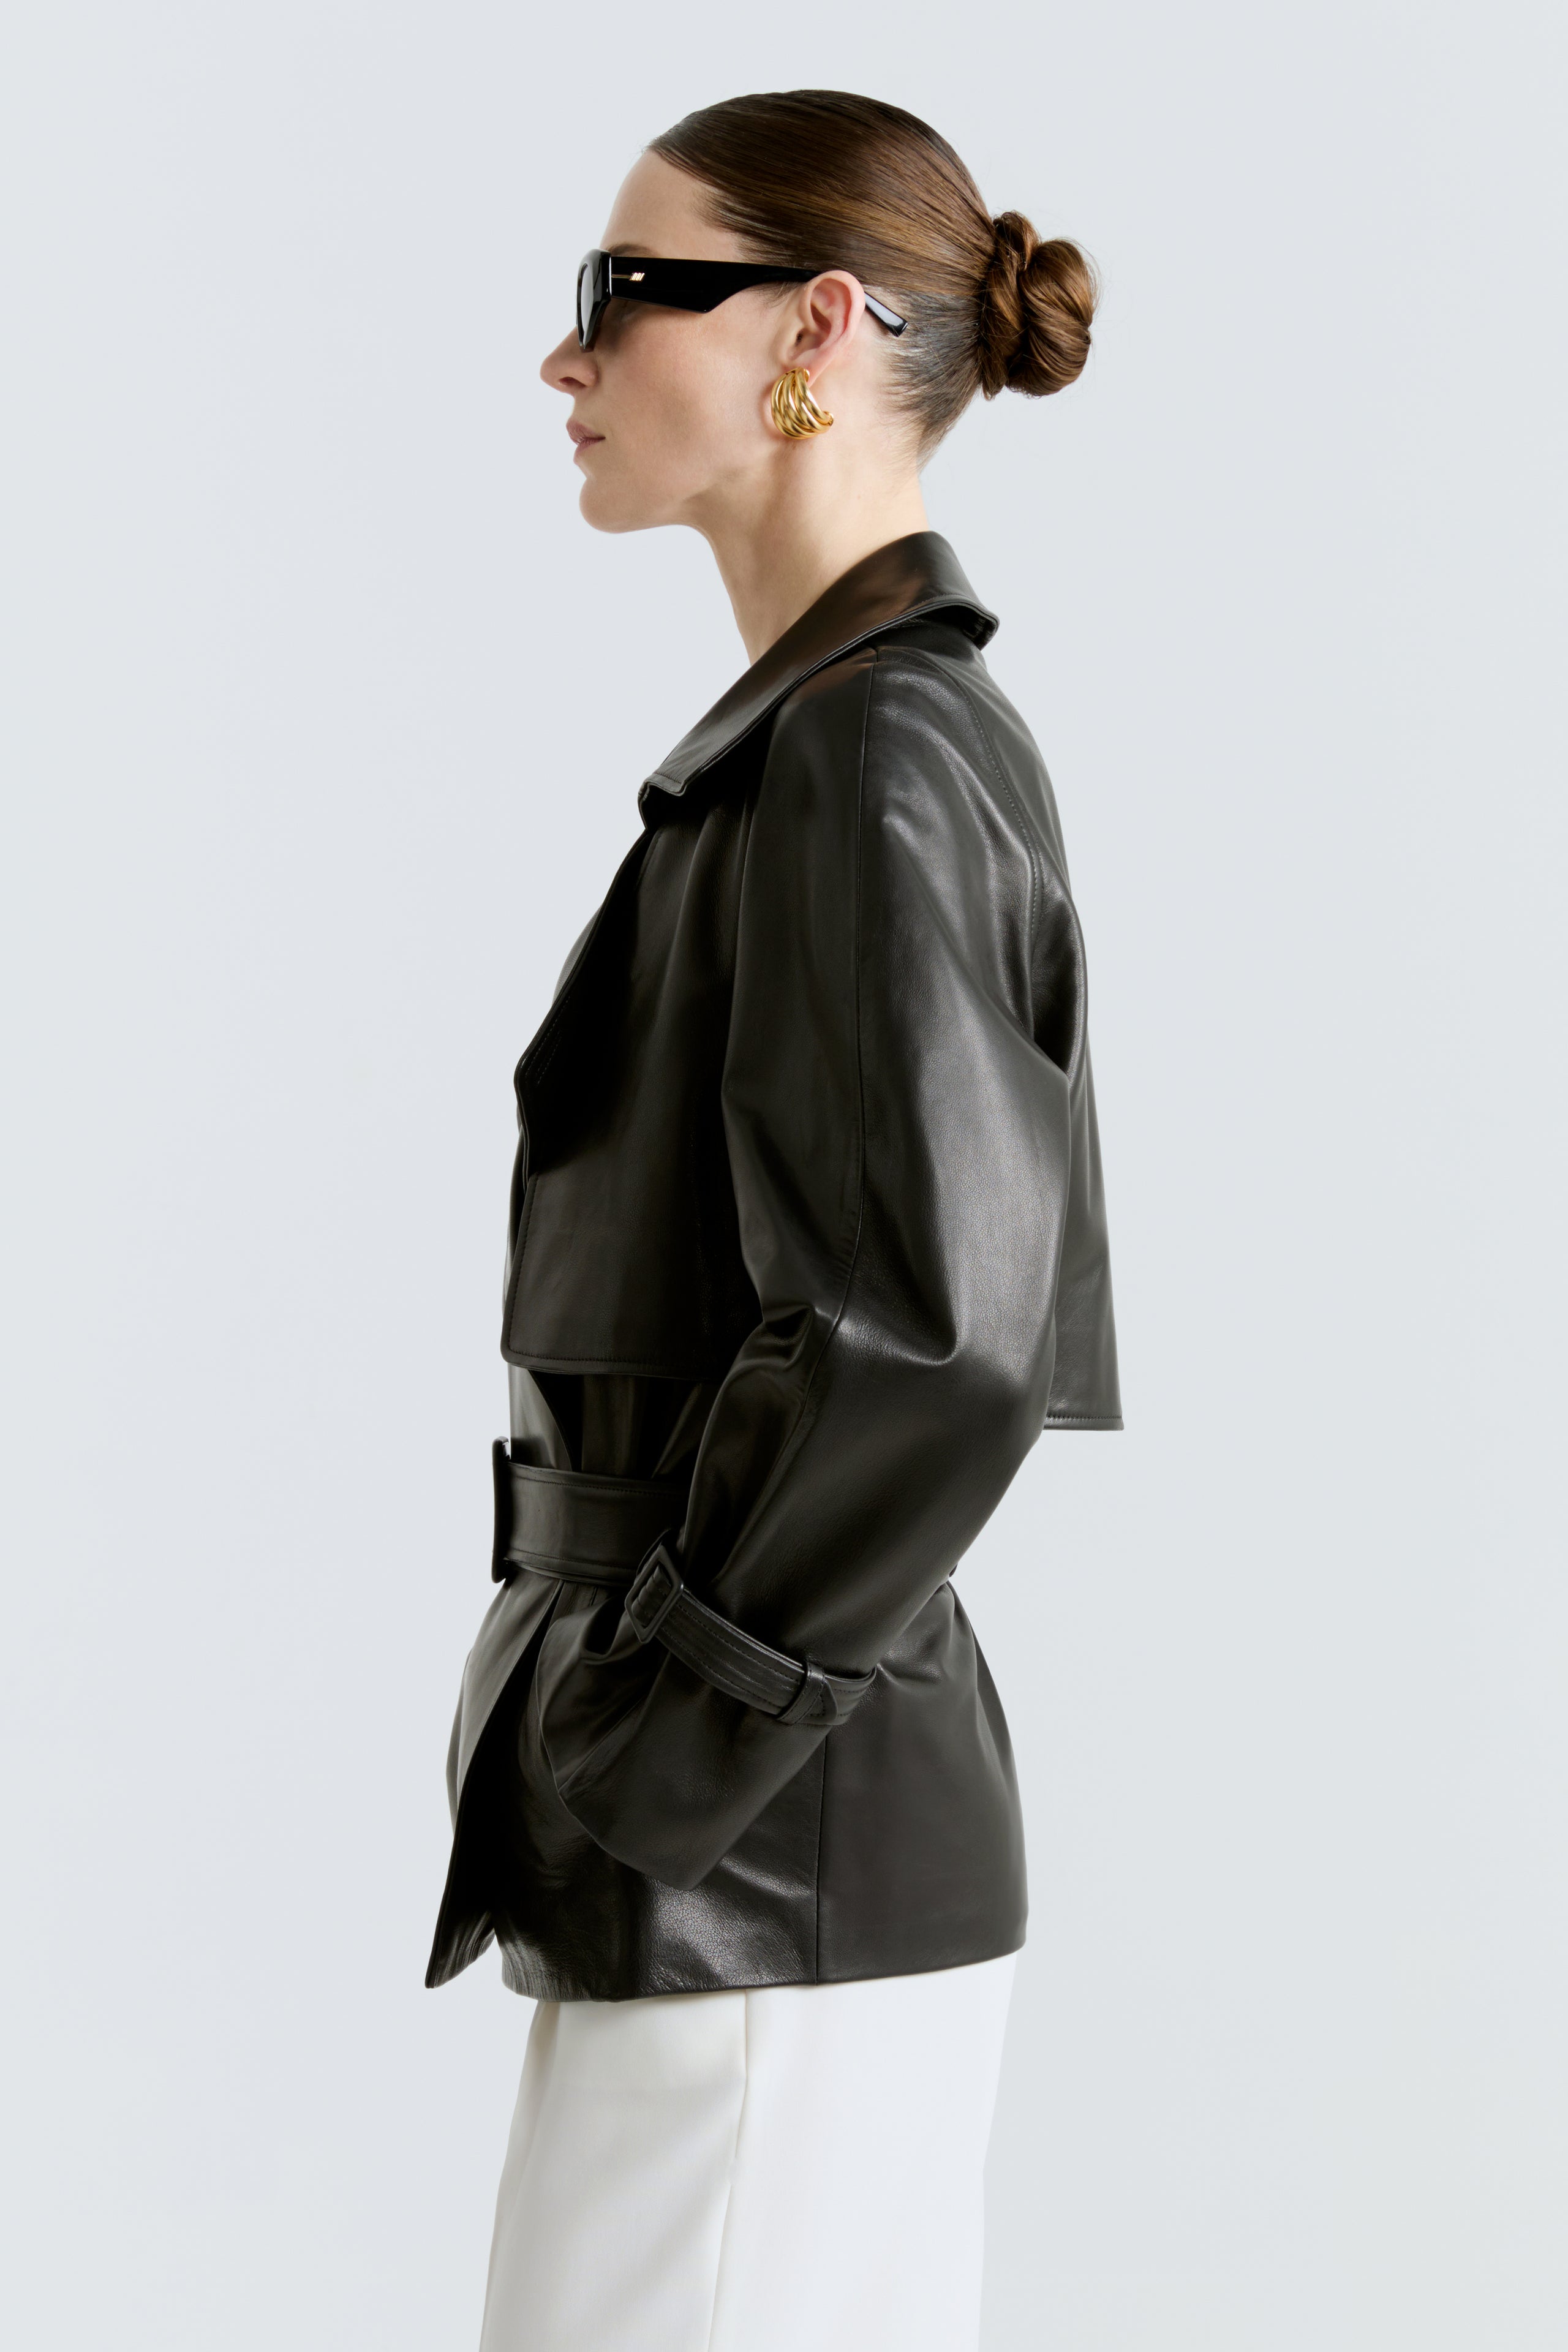 Model is wearing the Brea Black Belted Leather Short Trench Side